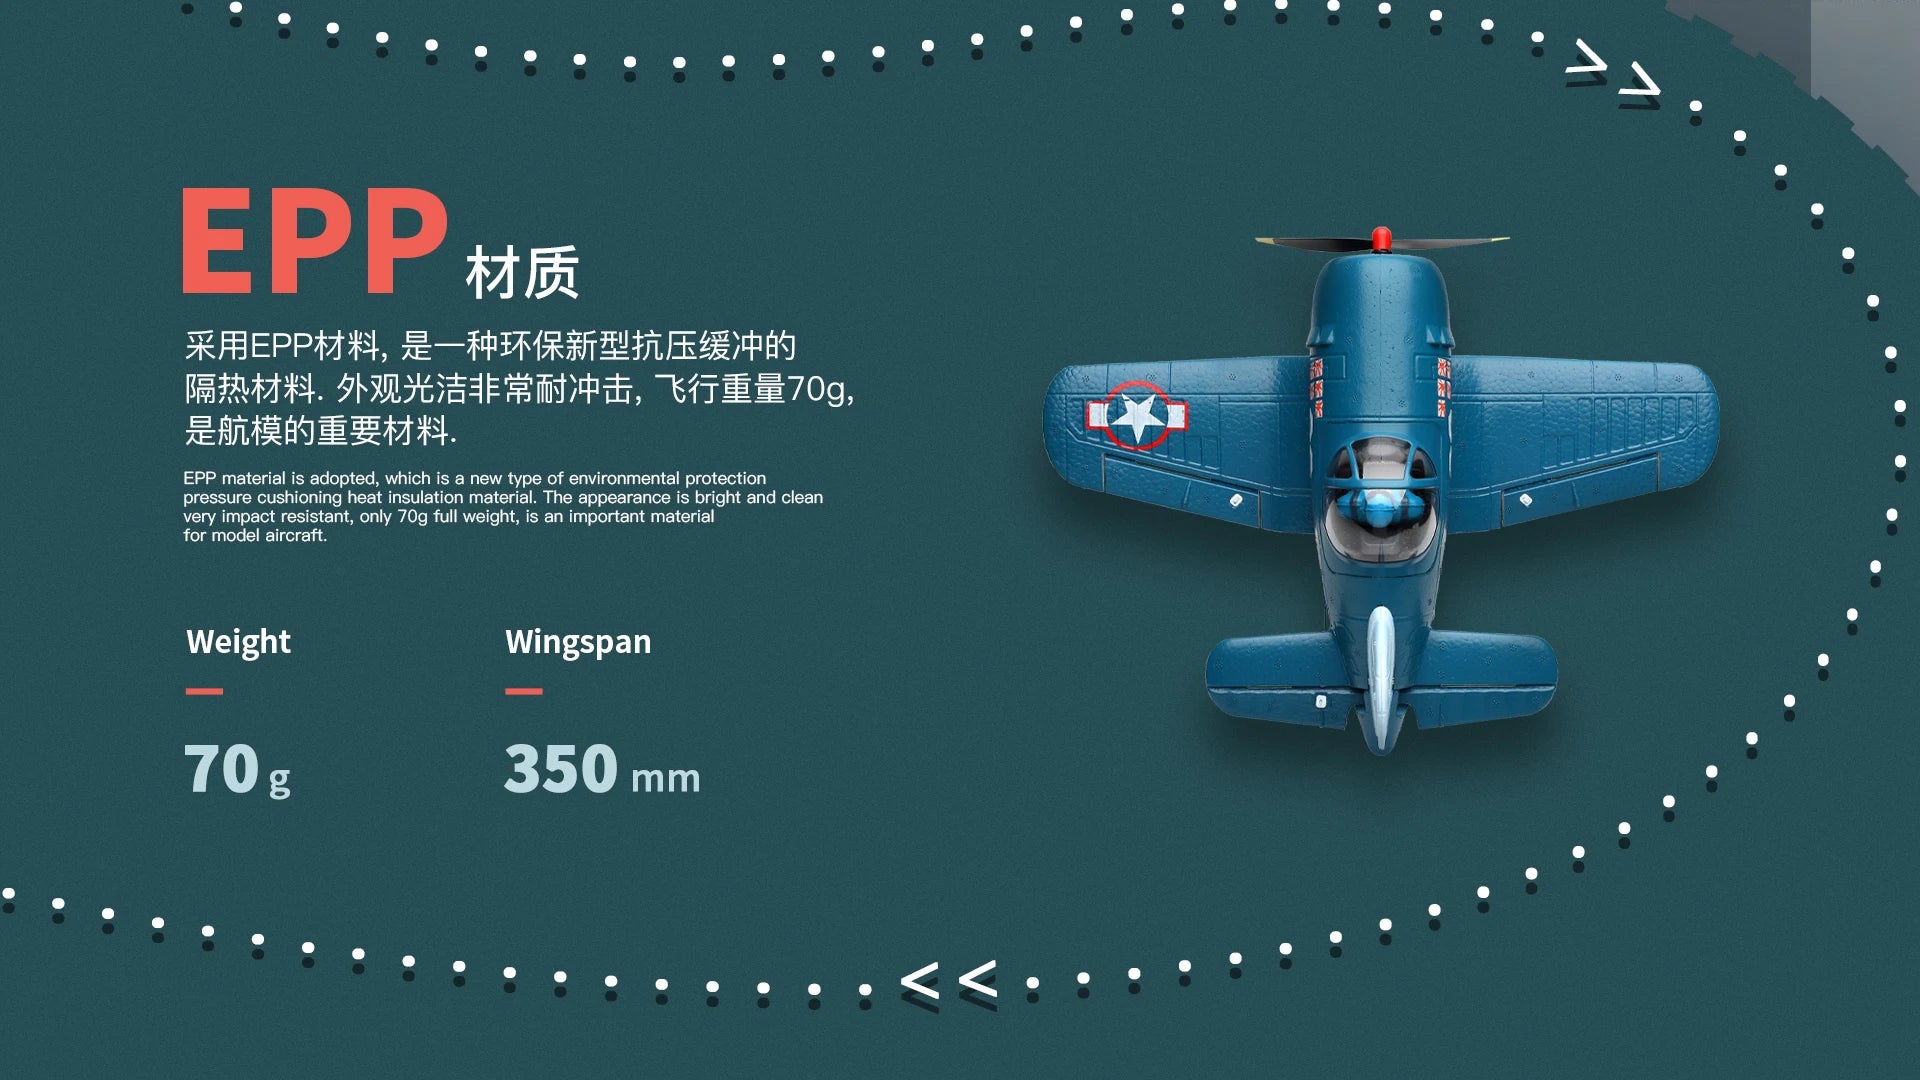 WLtoys XK A500  A250 RC Plane, EPP material is a new type of environmental protection pressure cushioning heat insulation material .